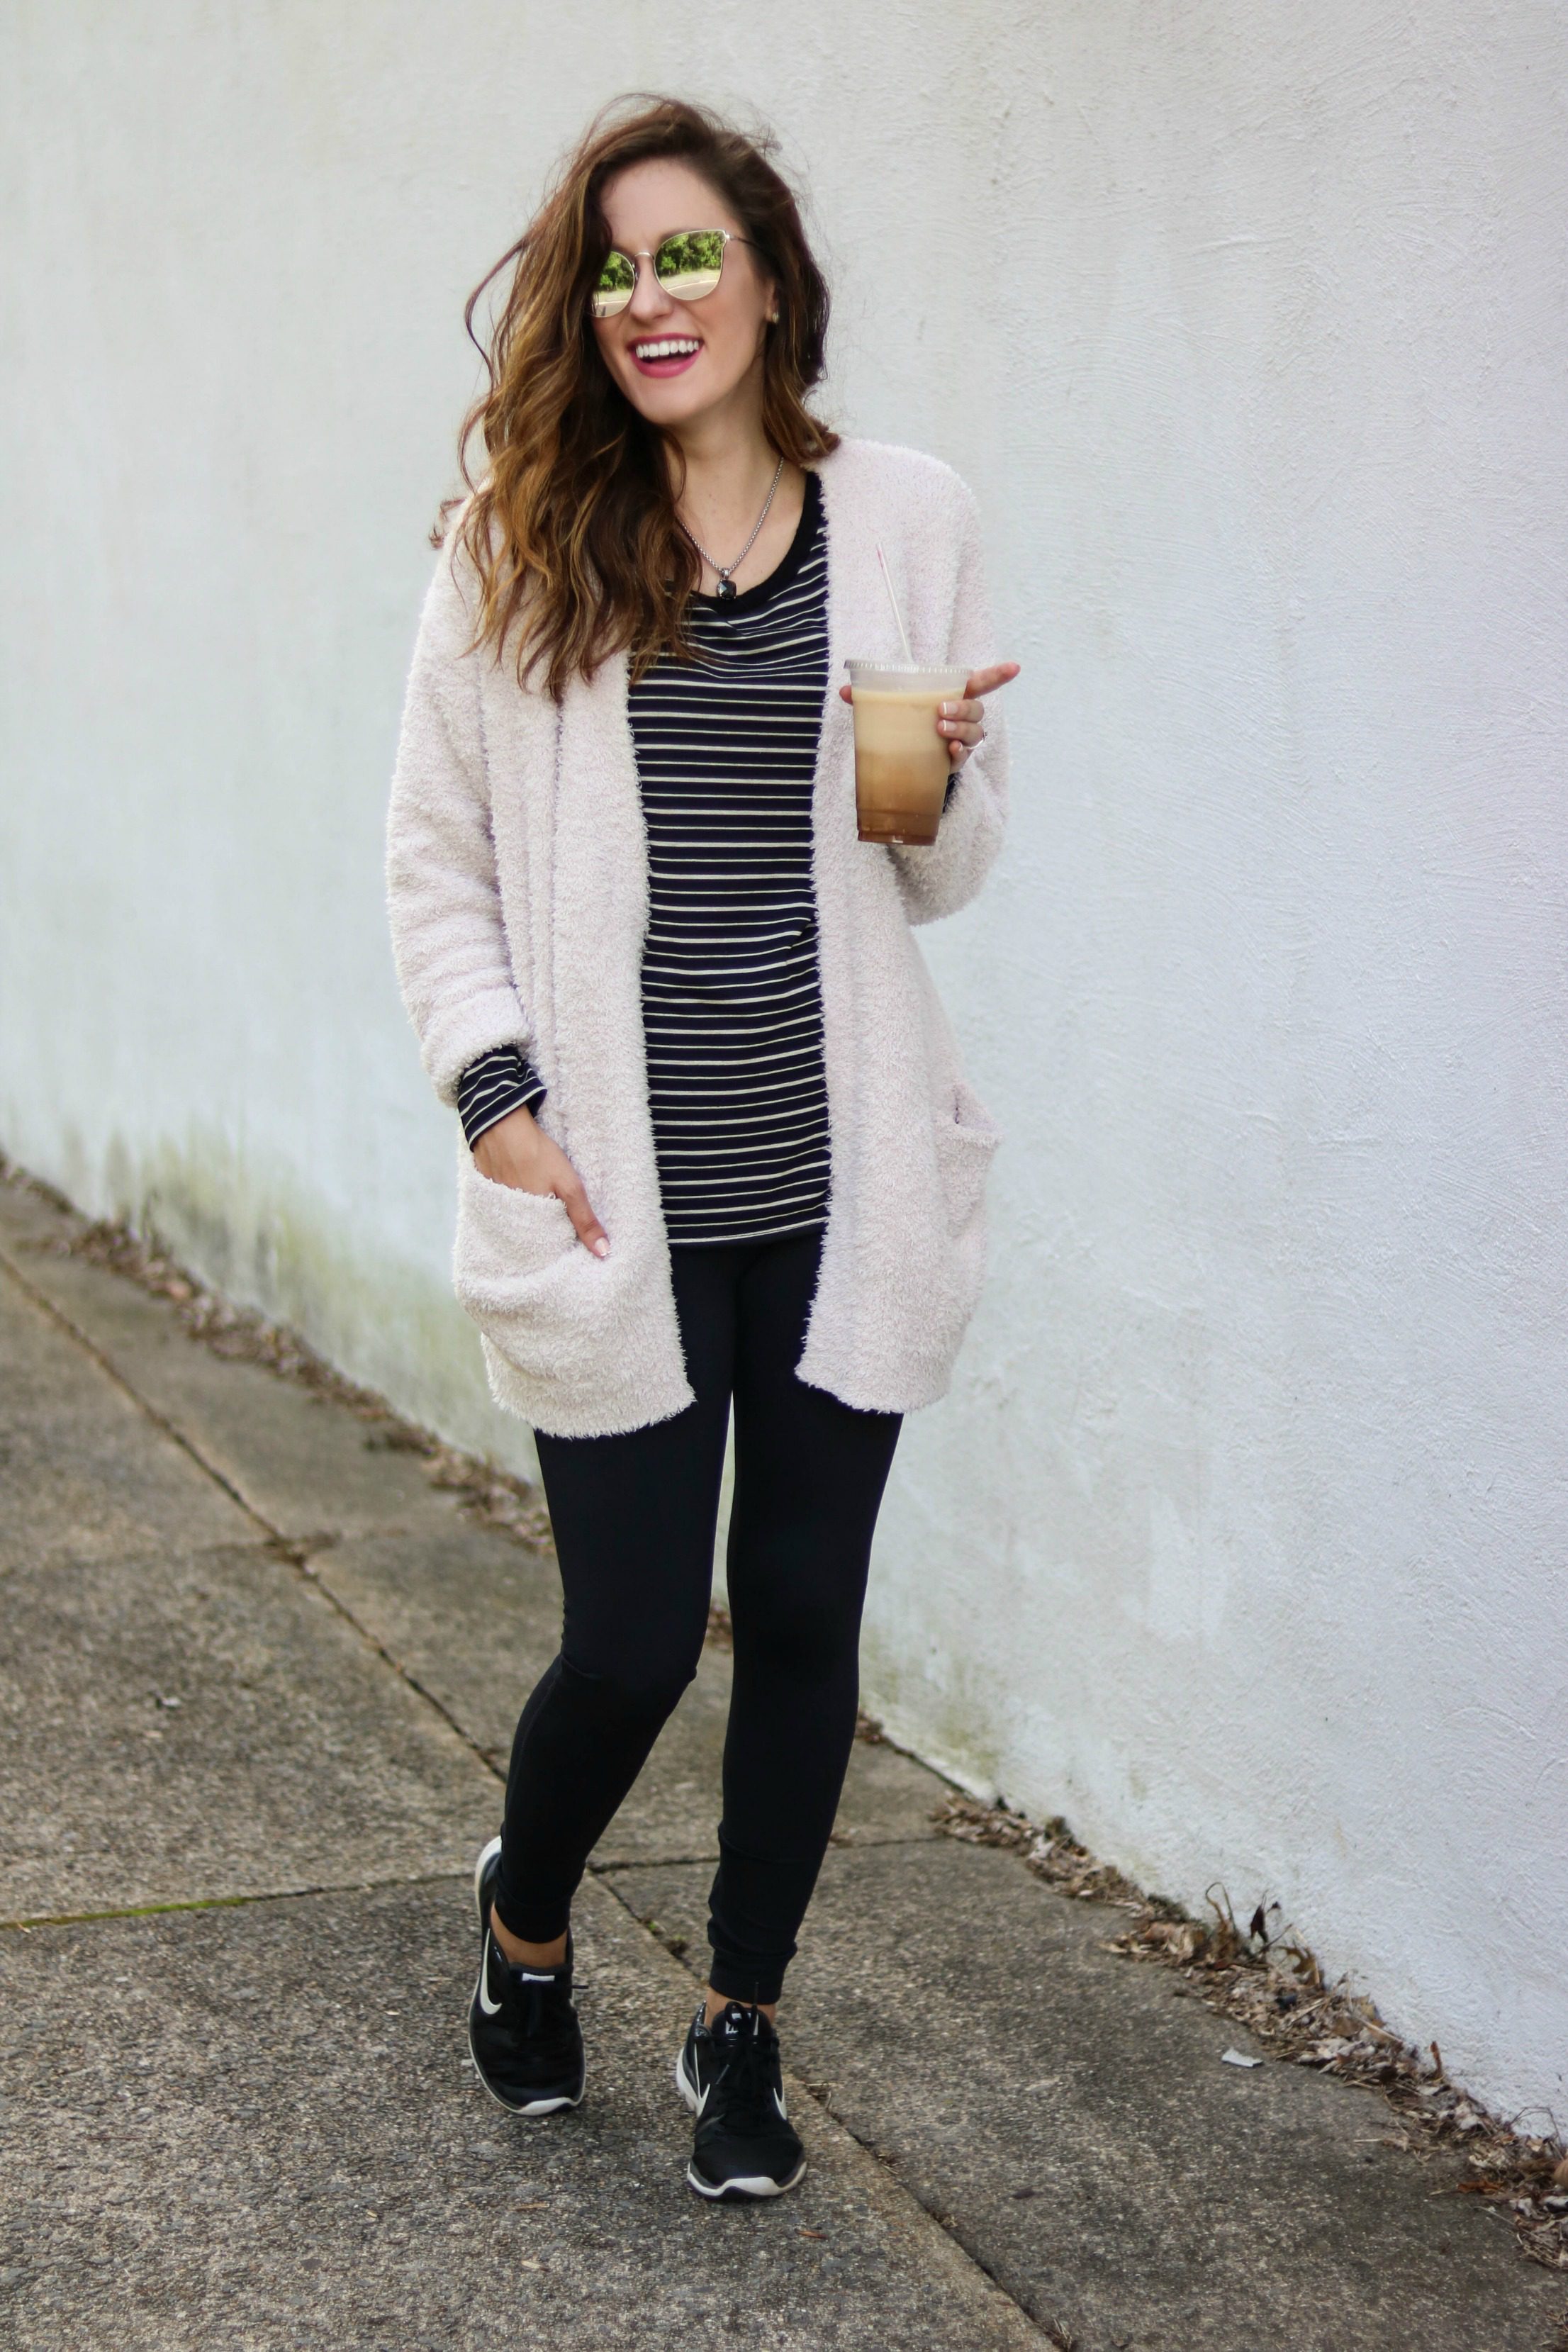 1 Thing, 3 Ways: Barefoot Dreams Cardigan. Philadelphia style blogger, Erica of Coming Up Roses, styles this on sale Barefoot Dreams Cardigan three different ways for transitioning to fall. Grab it while it's still on sale and in stock!